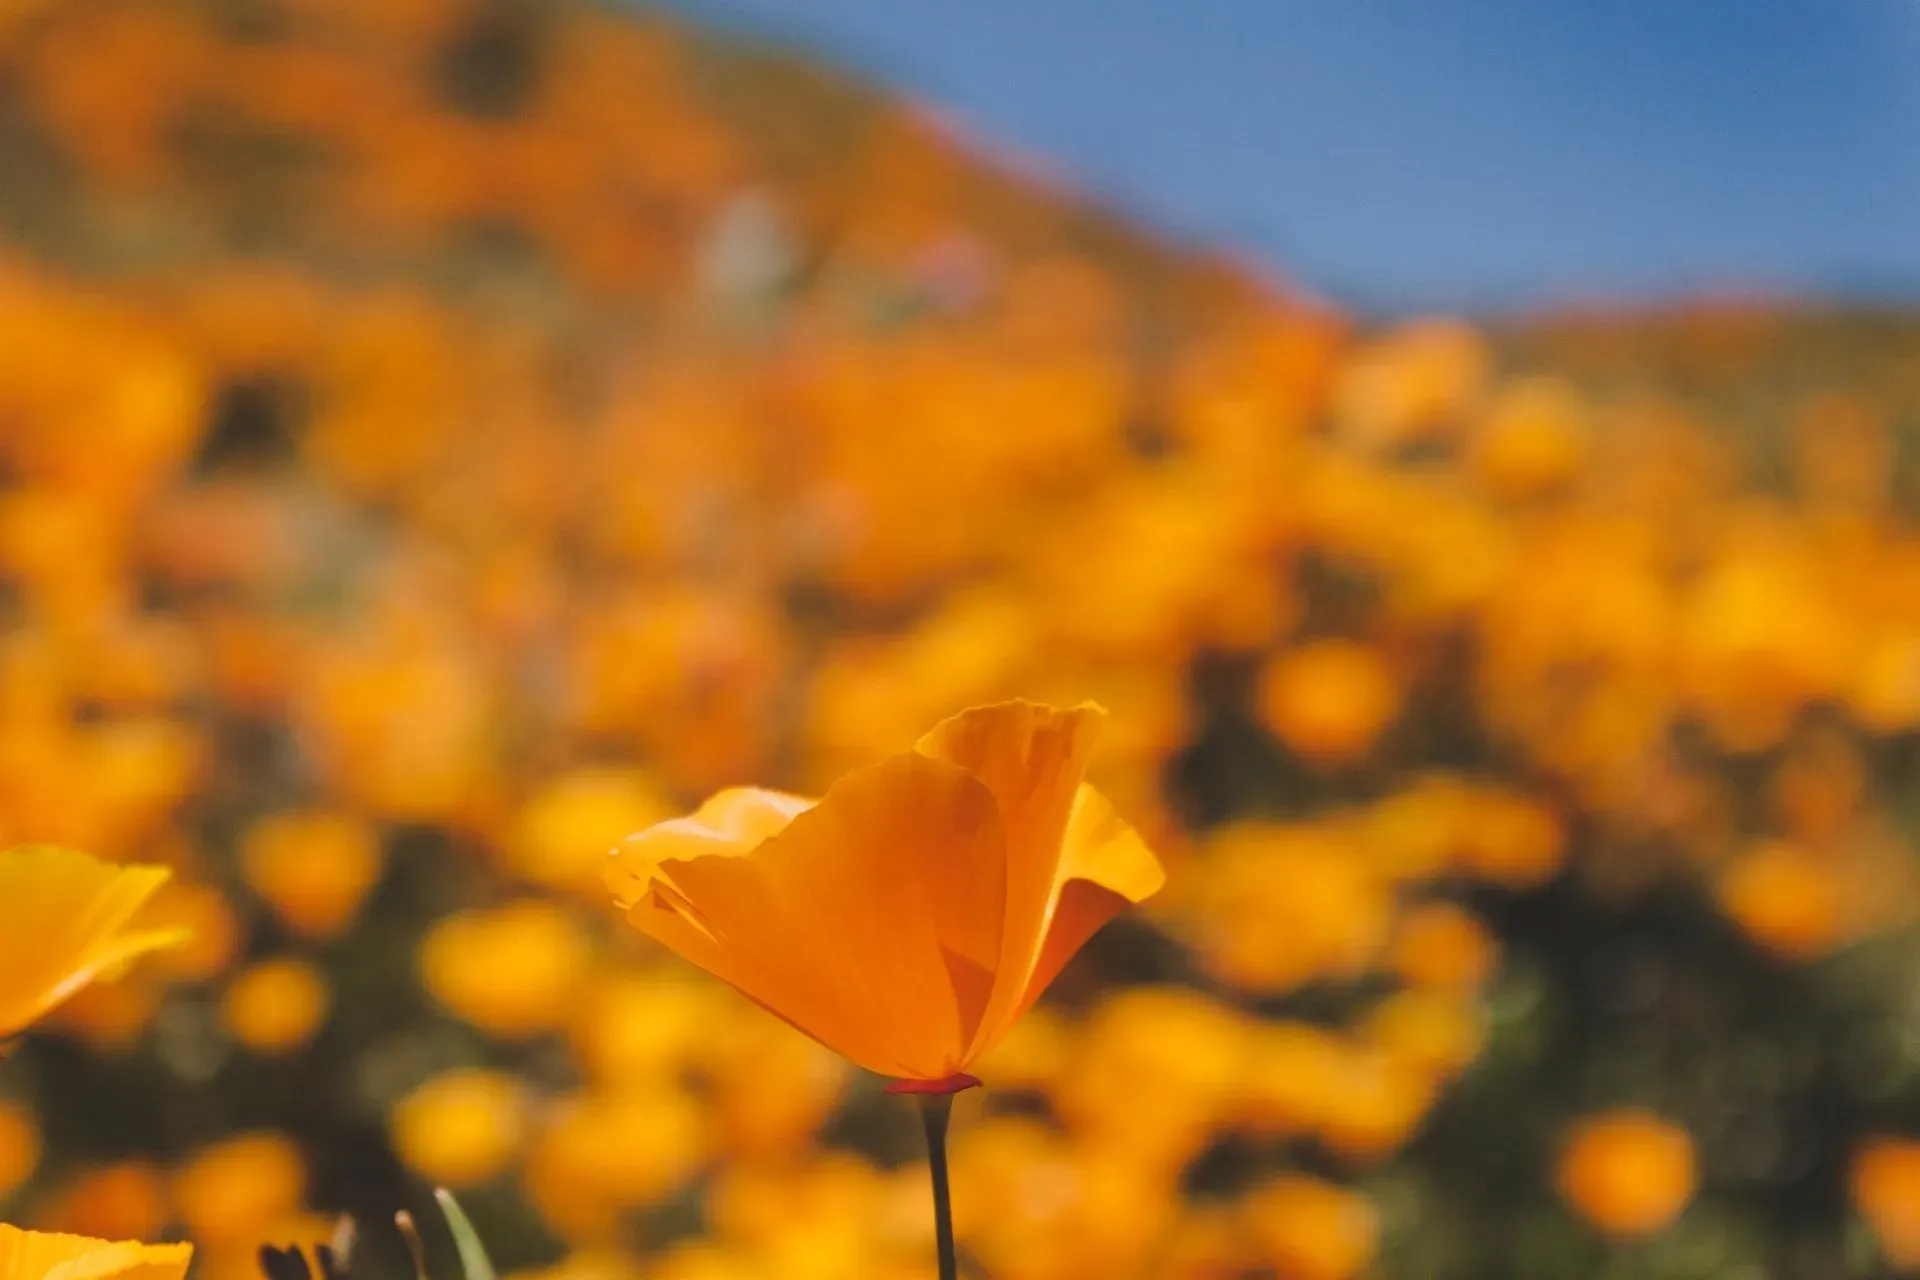 One of the many California poppy facts is that it is the state flower of California.